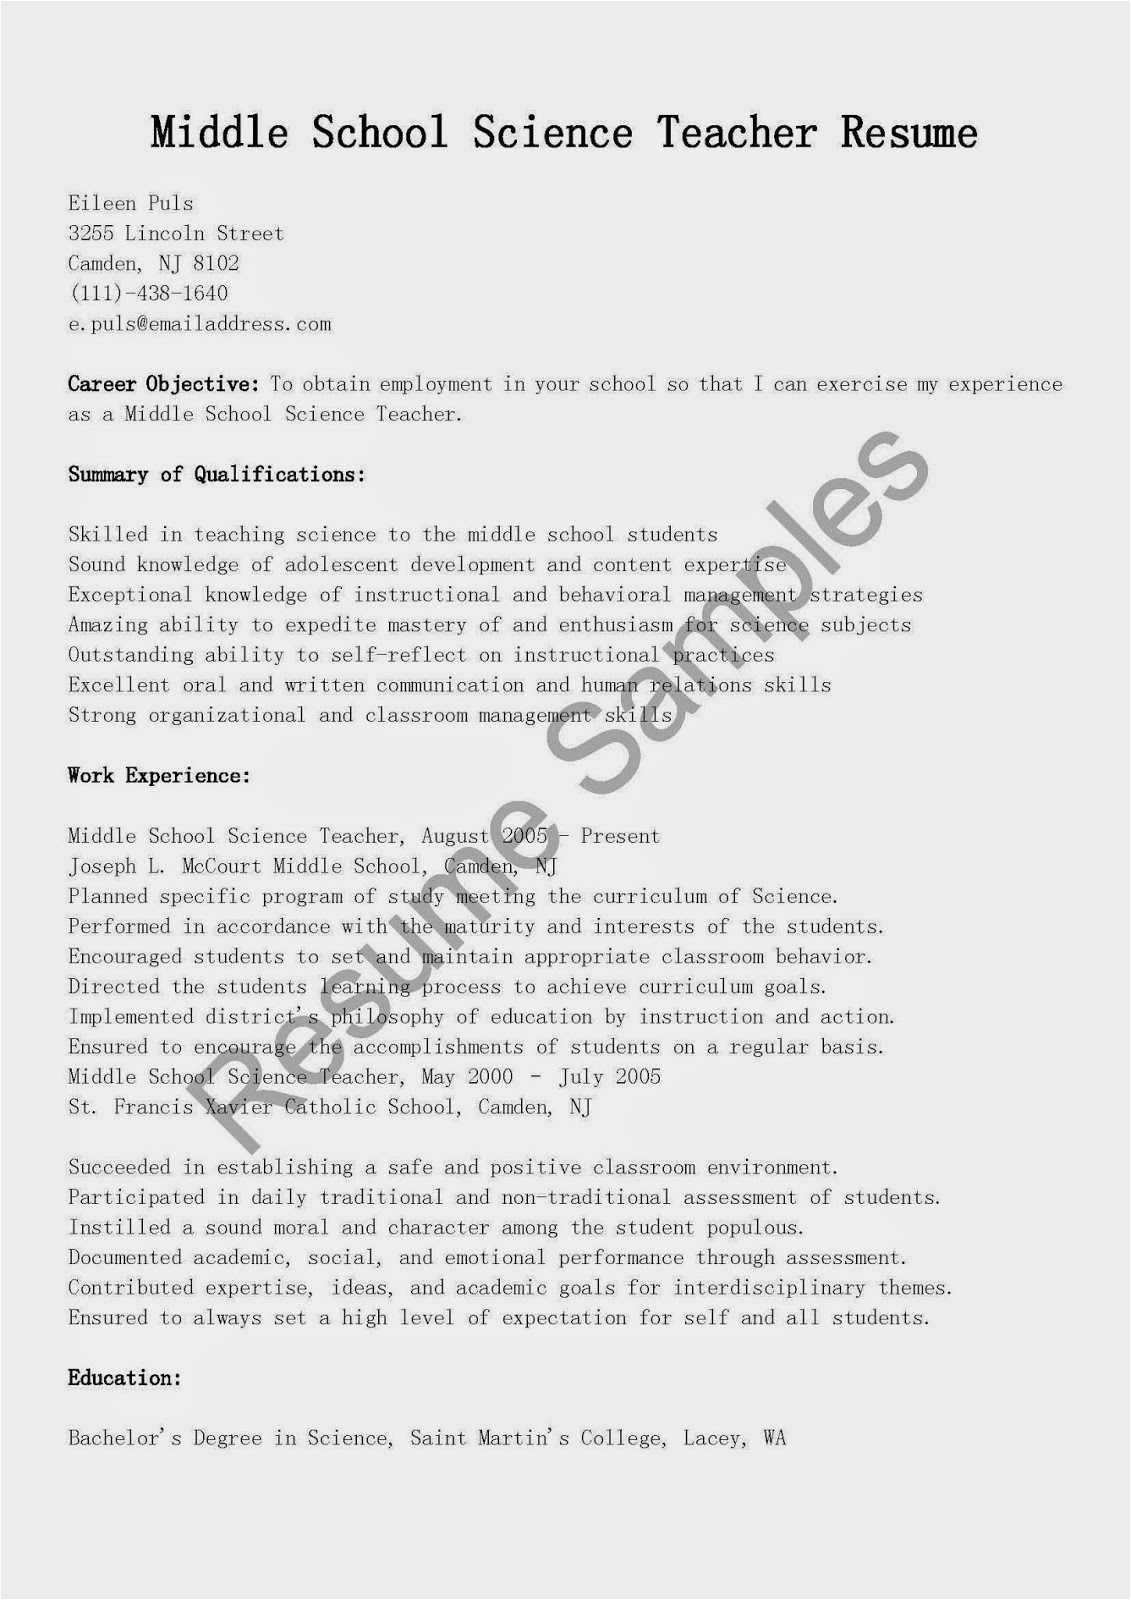 Sample Resume for Middle School Students Resume Samples Middle School Science Teacher Resume Sample